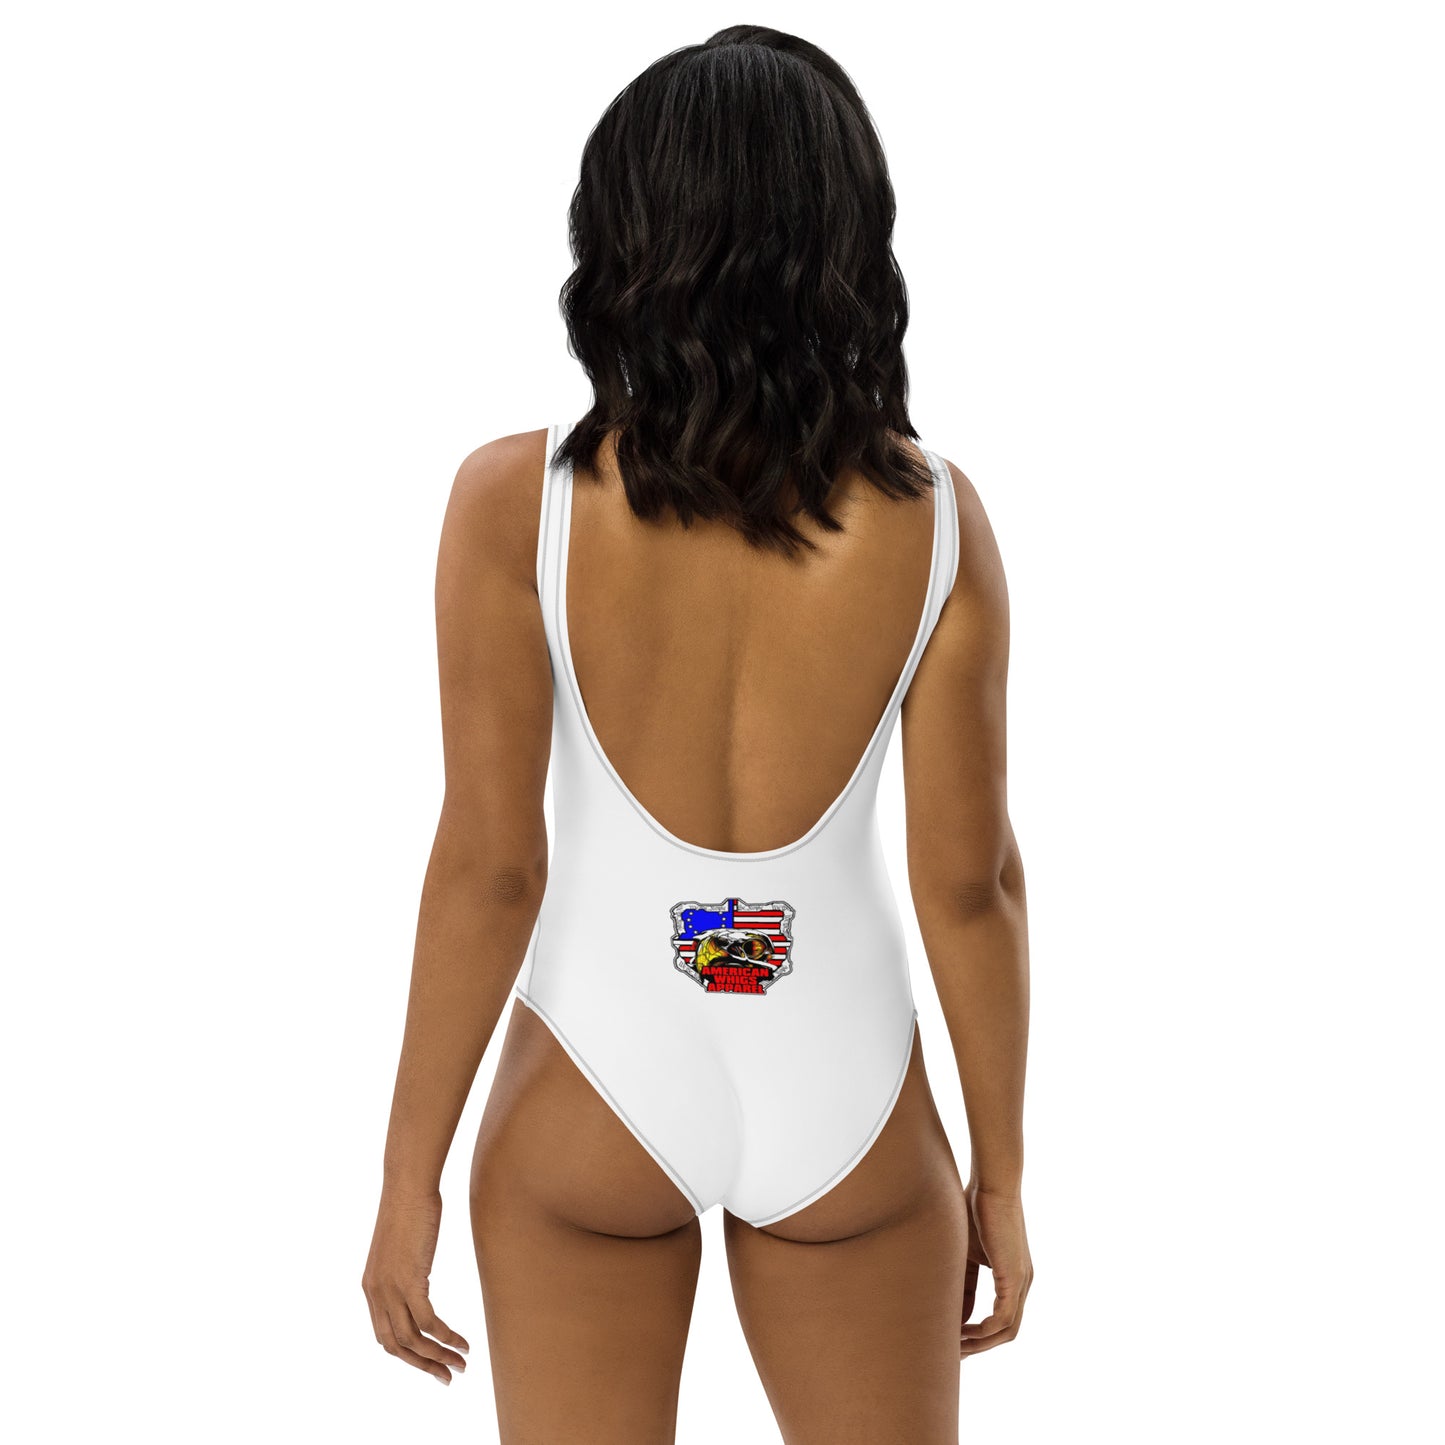 PEWDAY CANDY One-Piece Swimsuit